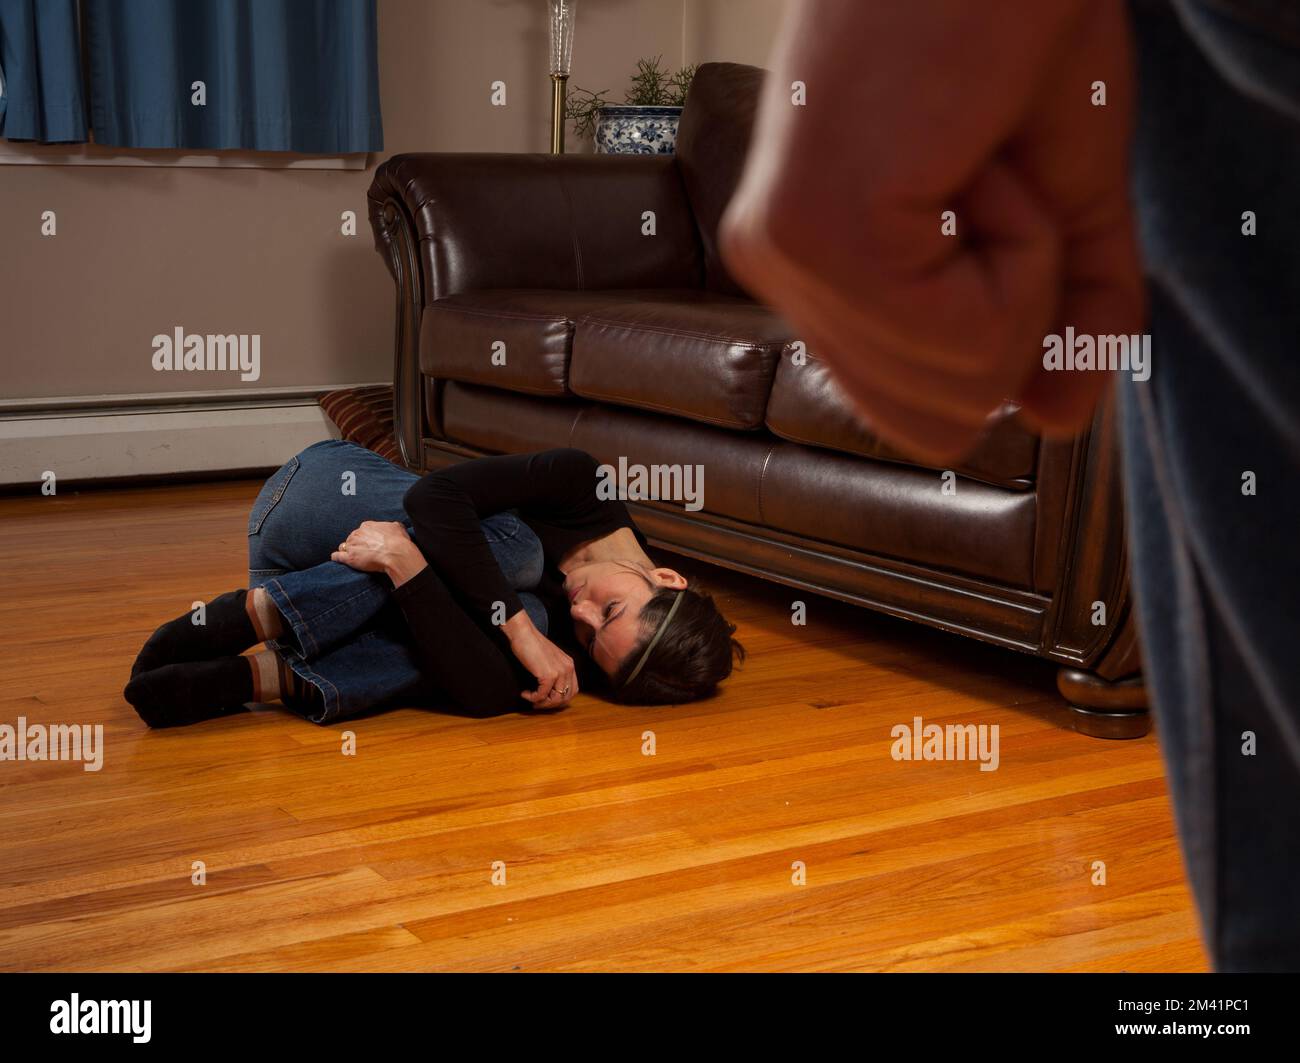 Domestic Violence Awareness - woman curled into fetal position in fear of partner Stock Photo